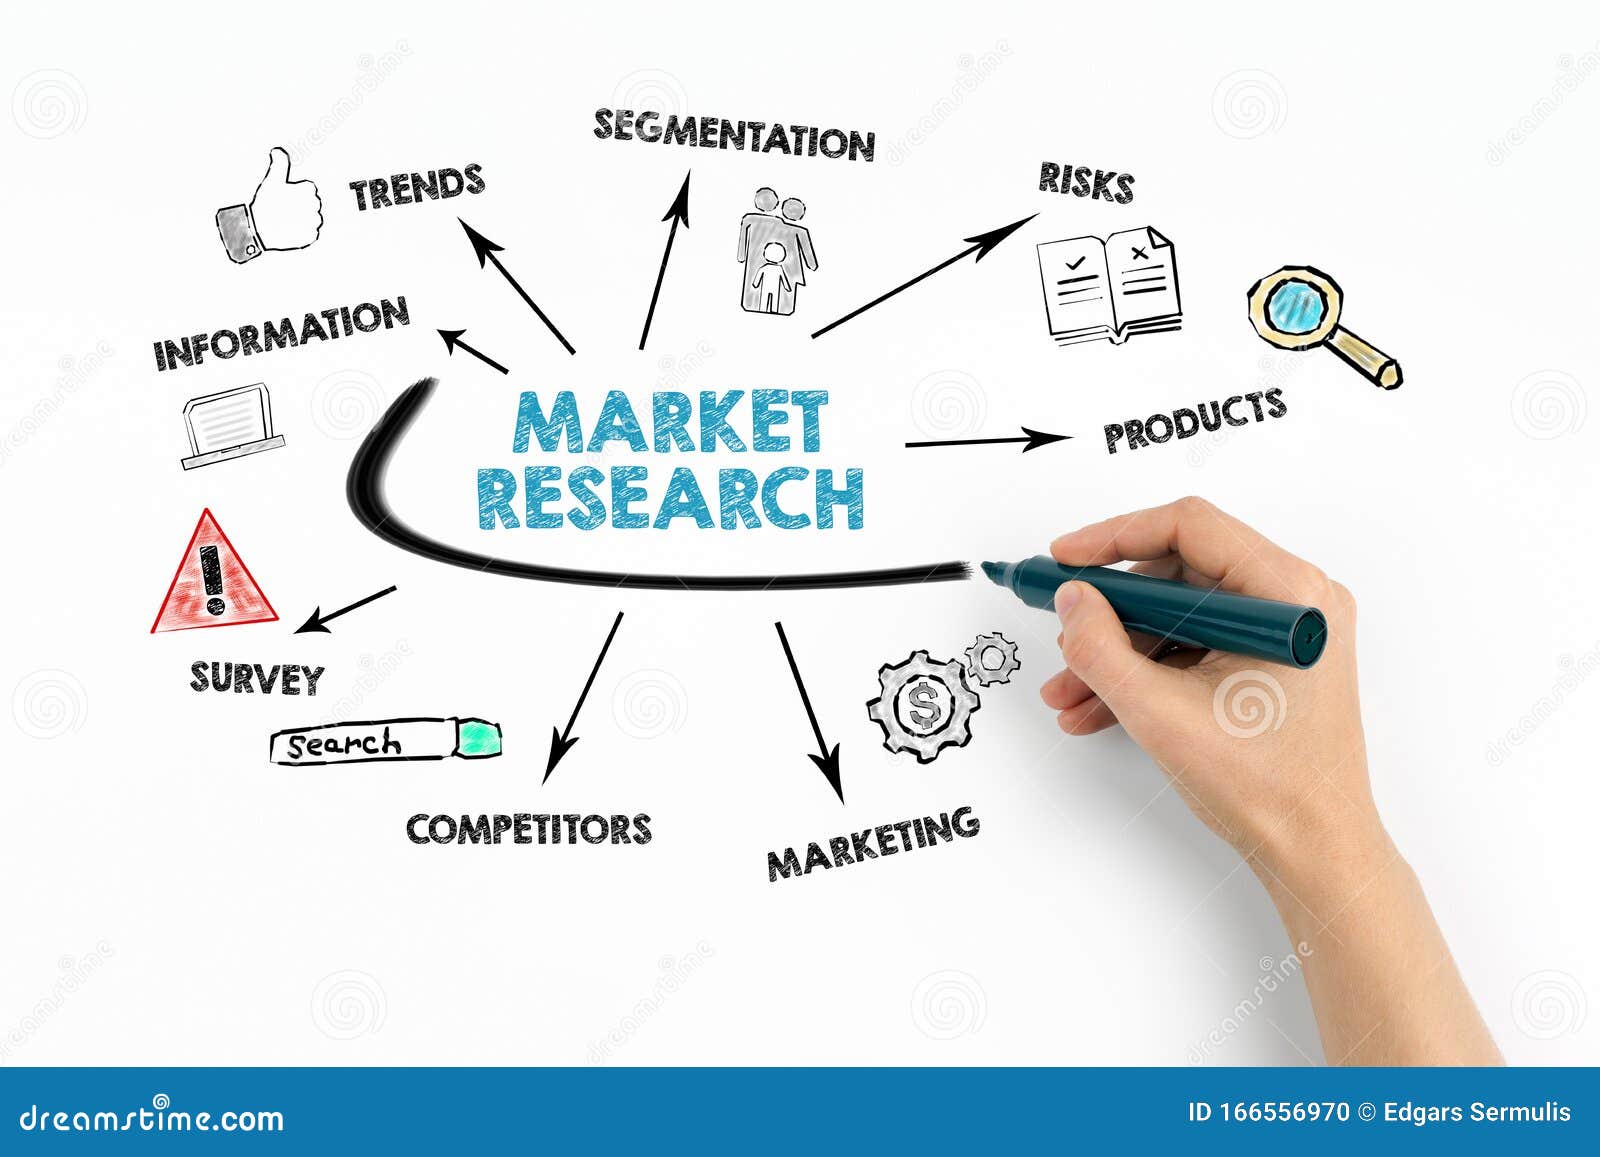 research paper market trends